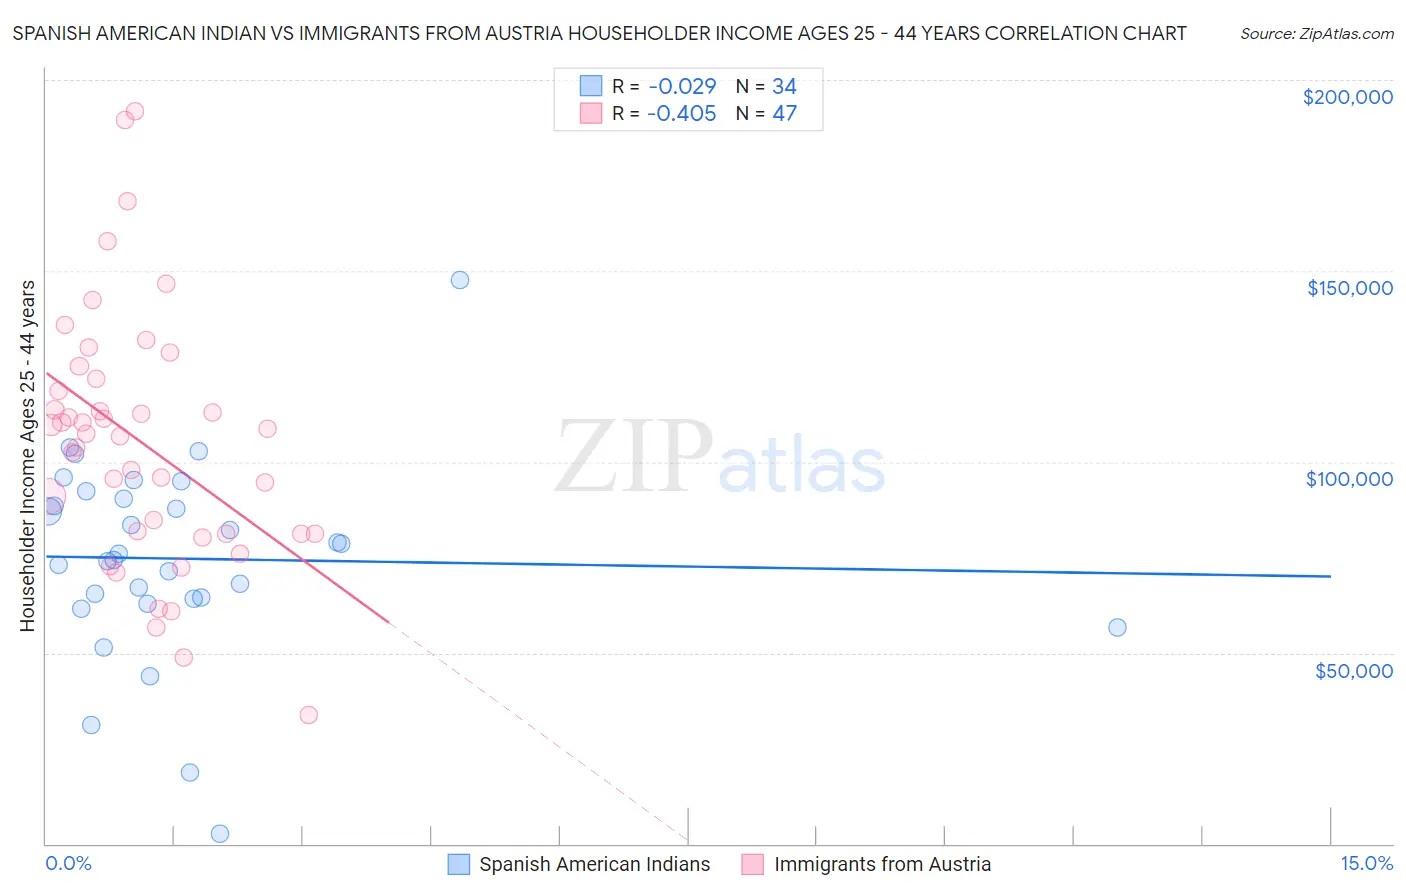 Spanish American Indian vs Immigrants from Austria Householder Income Ages 25 - 44 years